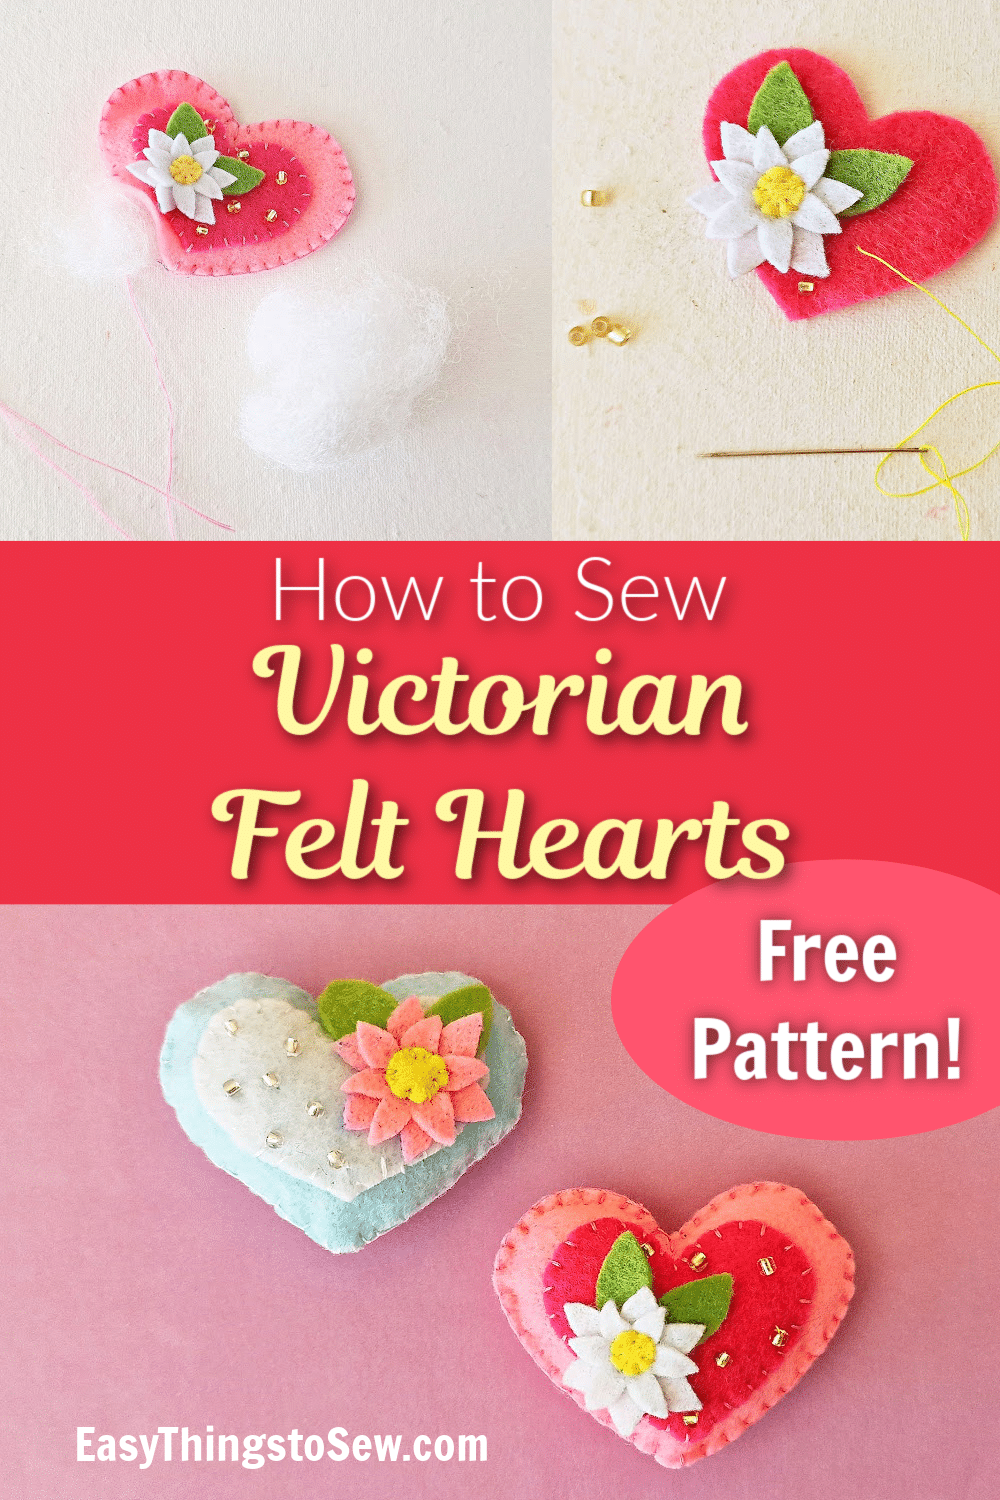 Learn how to sew intricate and charming Victorian felt hearts adorned with delicate flowers.